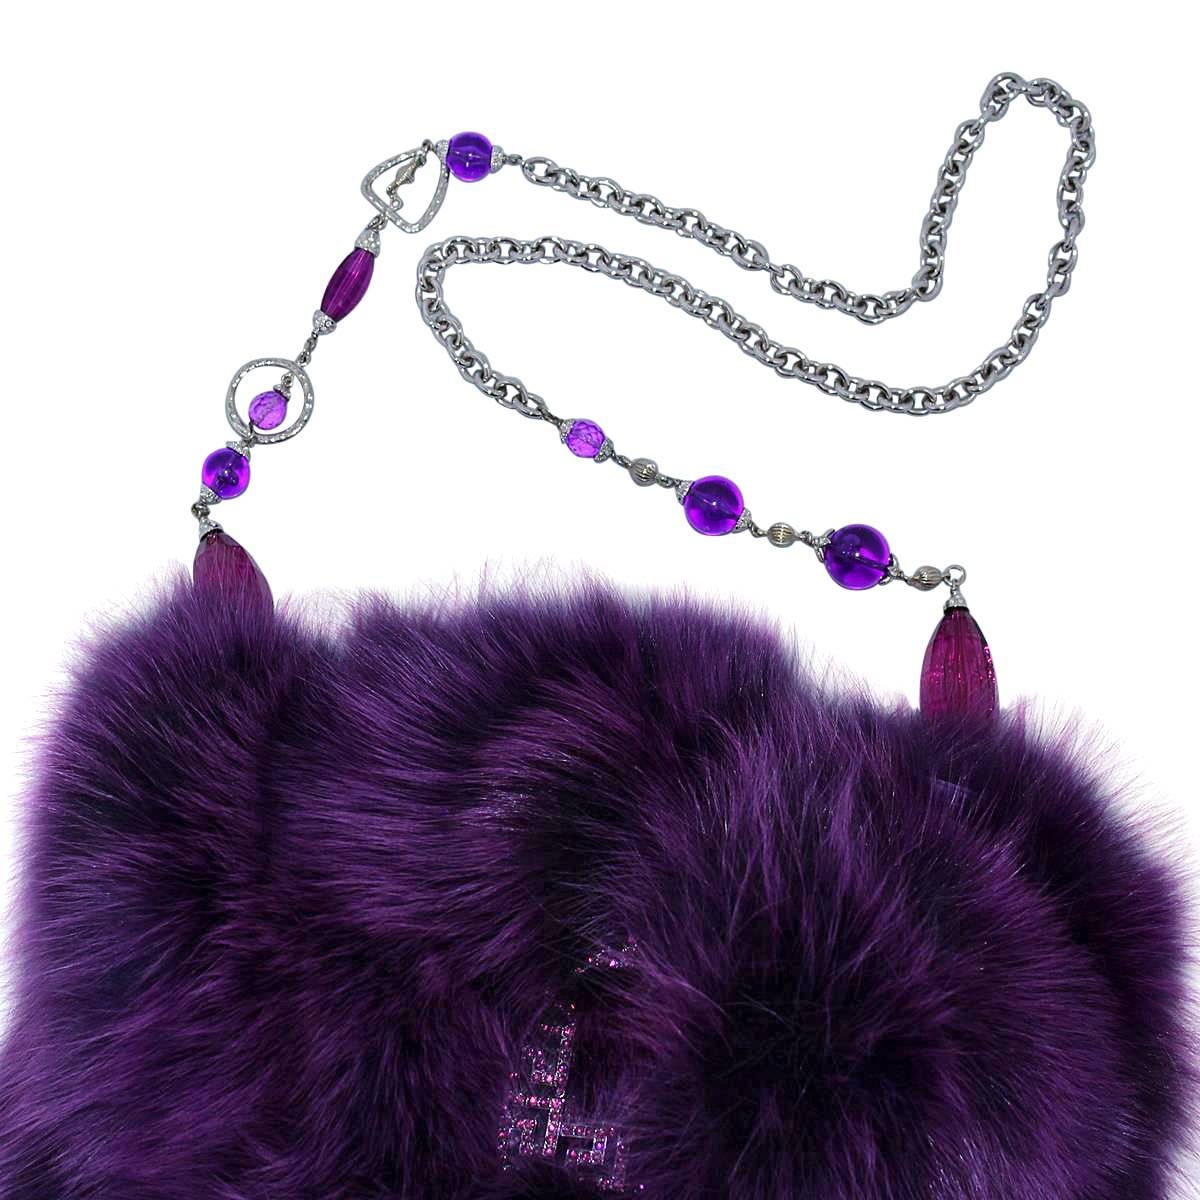 Amazing bag by Zini
Fox fur
Purple color
Jewel chain with colored resin and crystals
Rhinestones insert
Zip closure
Cm 38 x 38 (14.9 x 14.9 inches)
Unique piece !
Worldwide express shipping included in the price !
